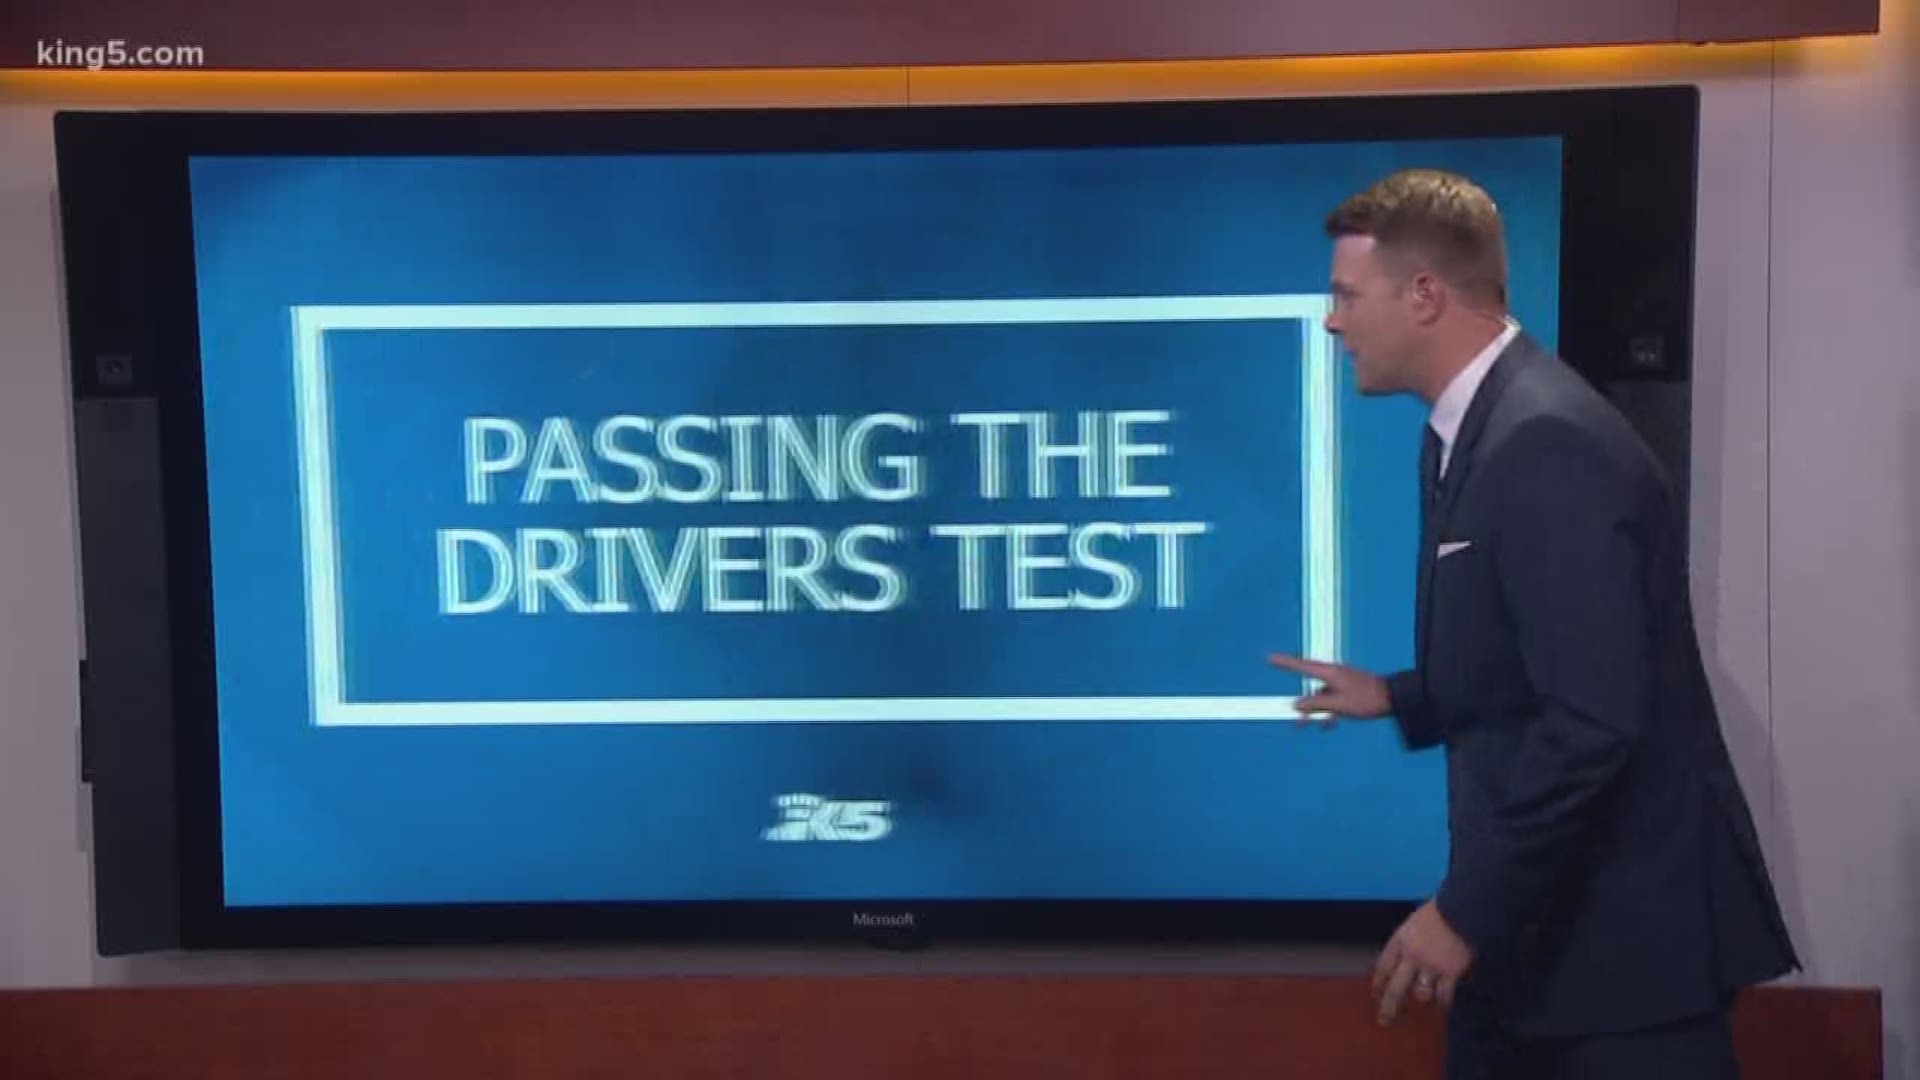 A new study suggests that Washington's driver's license test is the toughest in the nation based on the written test's questions and the on-road skills required to pass.